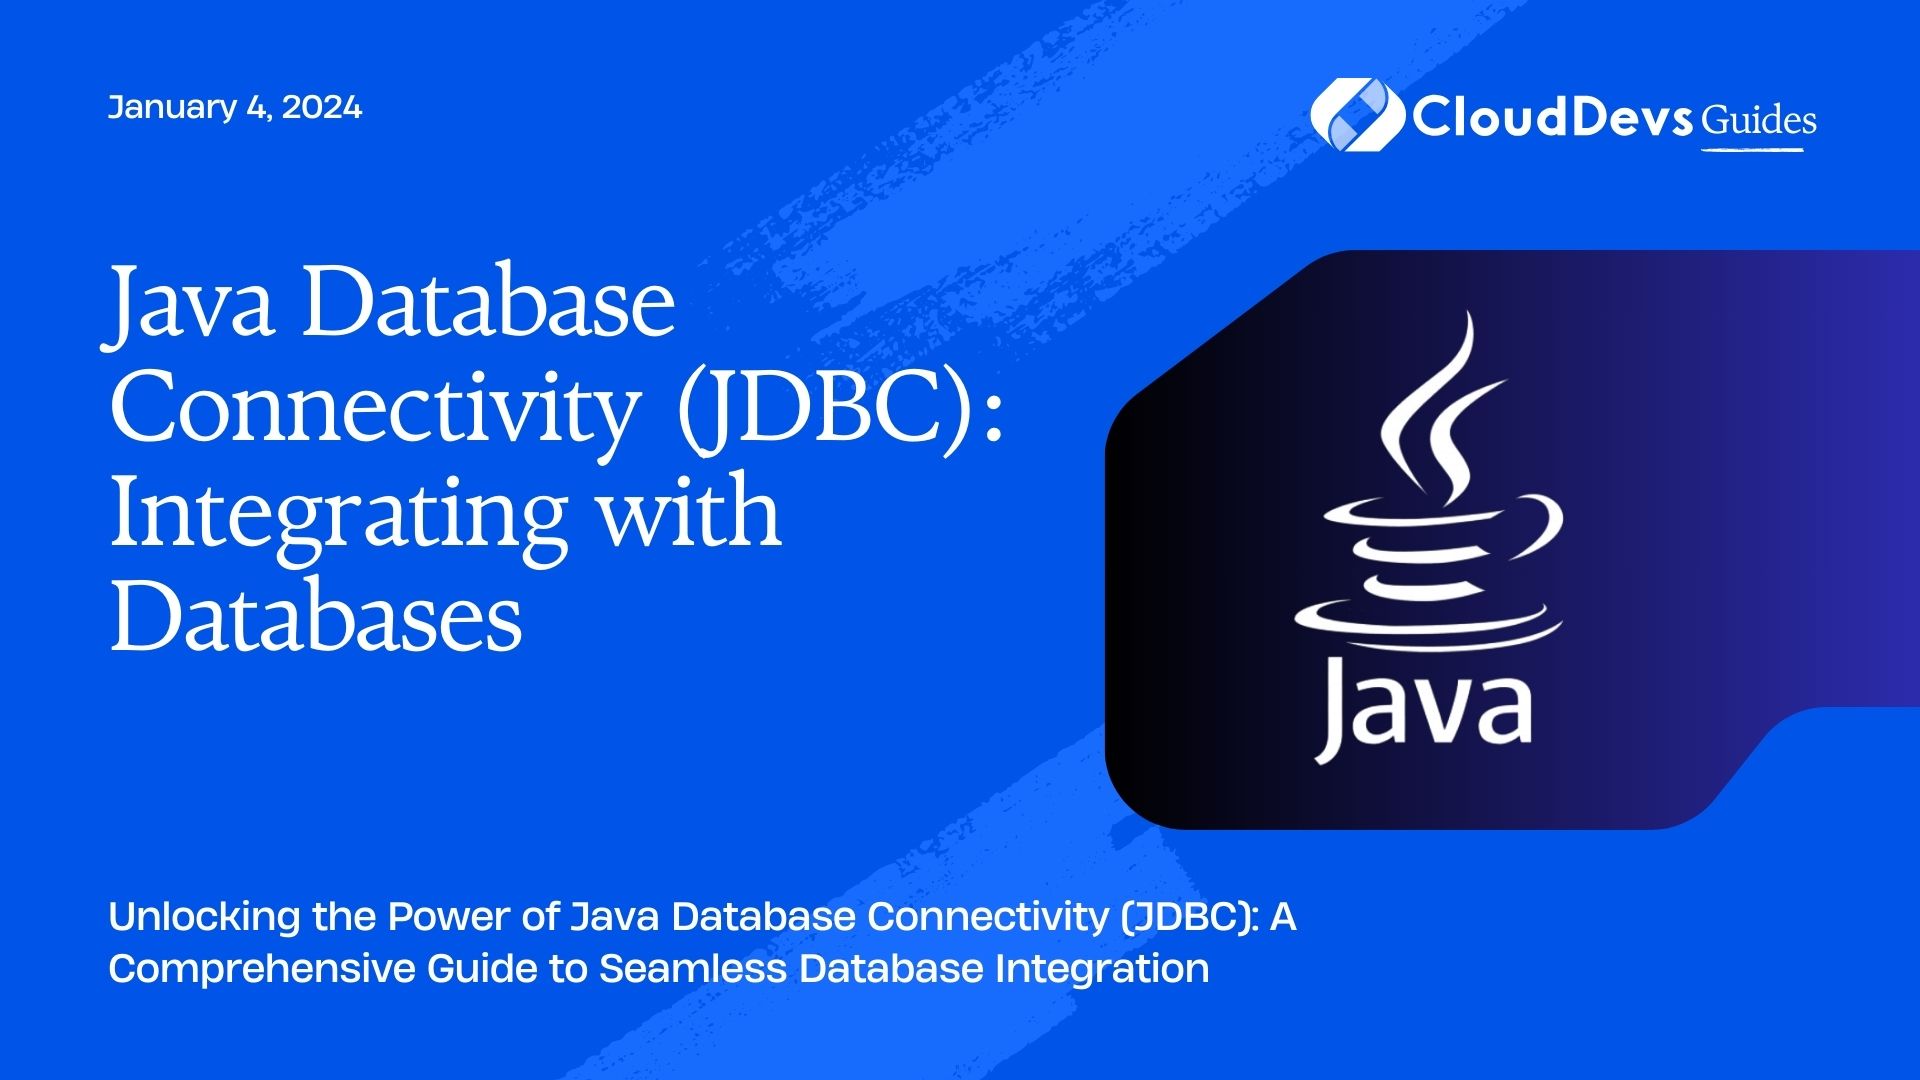 Java Database Connectivity (JDBC): Integrating with Databases